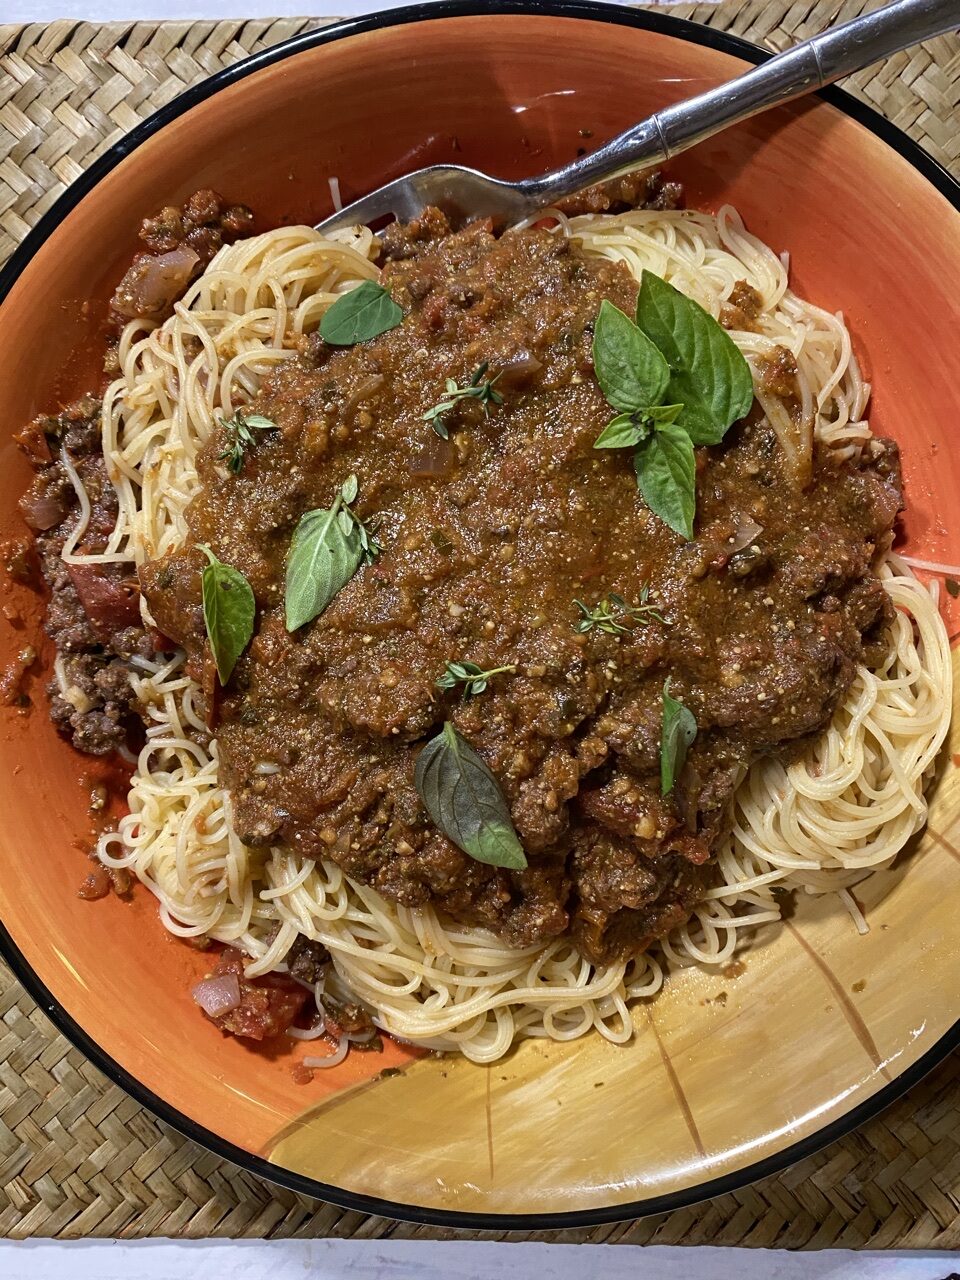 B60402BB 5721 472C B781 2B77DBFD1E85 e1604086314438 - How to Make the Most Flavorful Homemade Spaghetti Sauce from Scratch